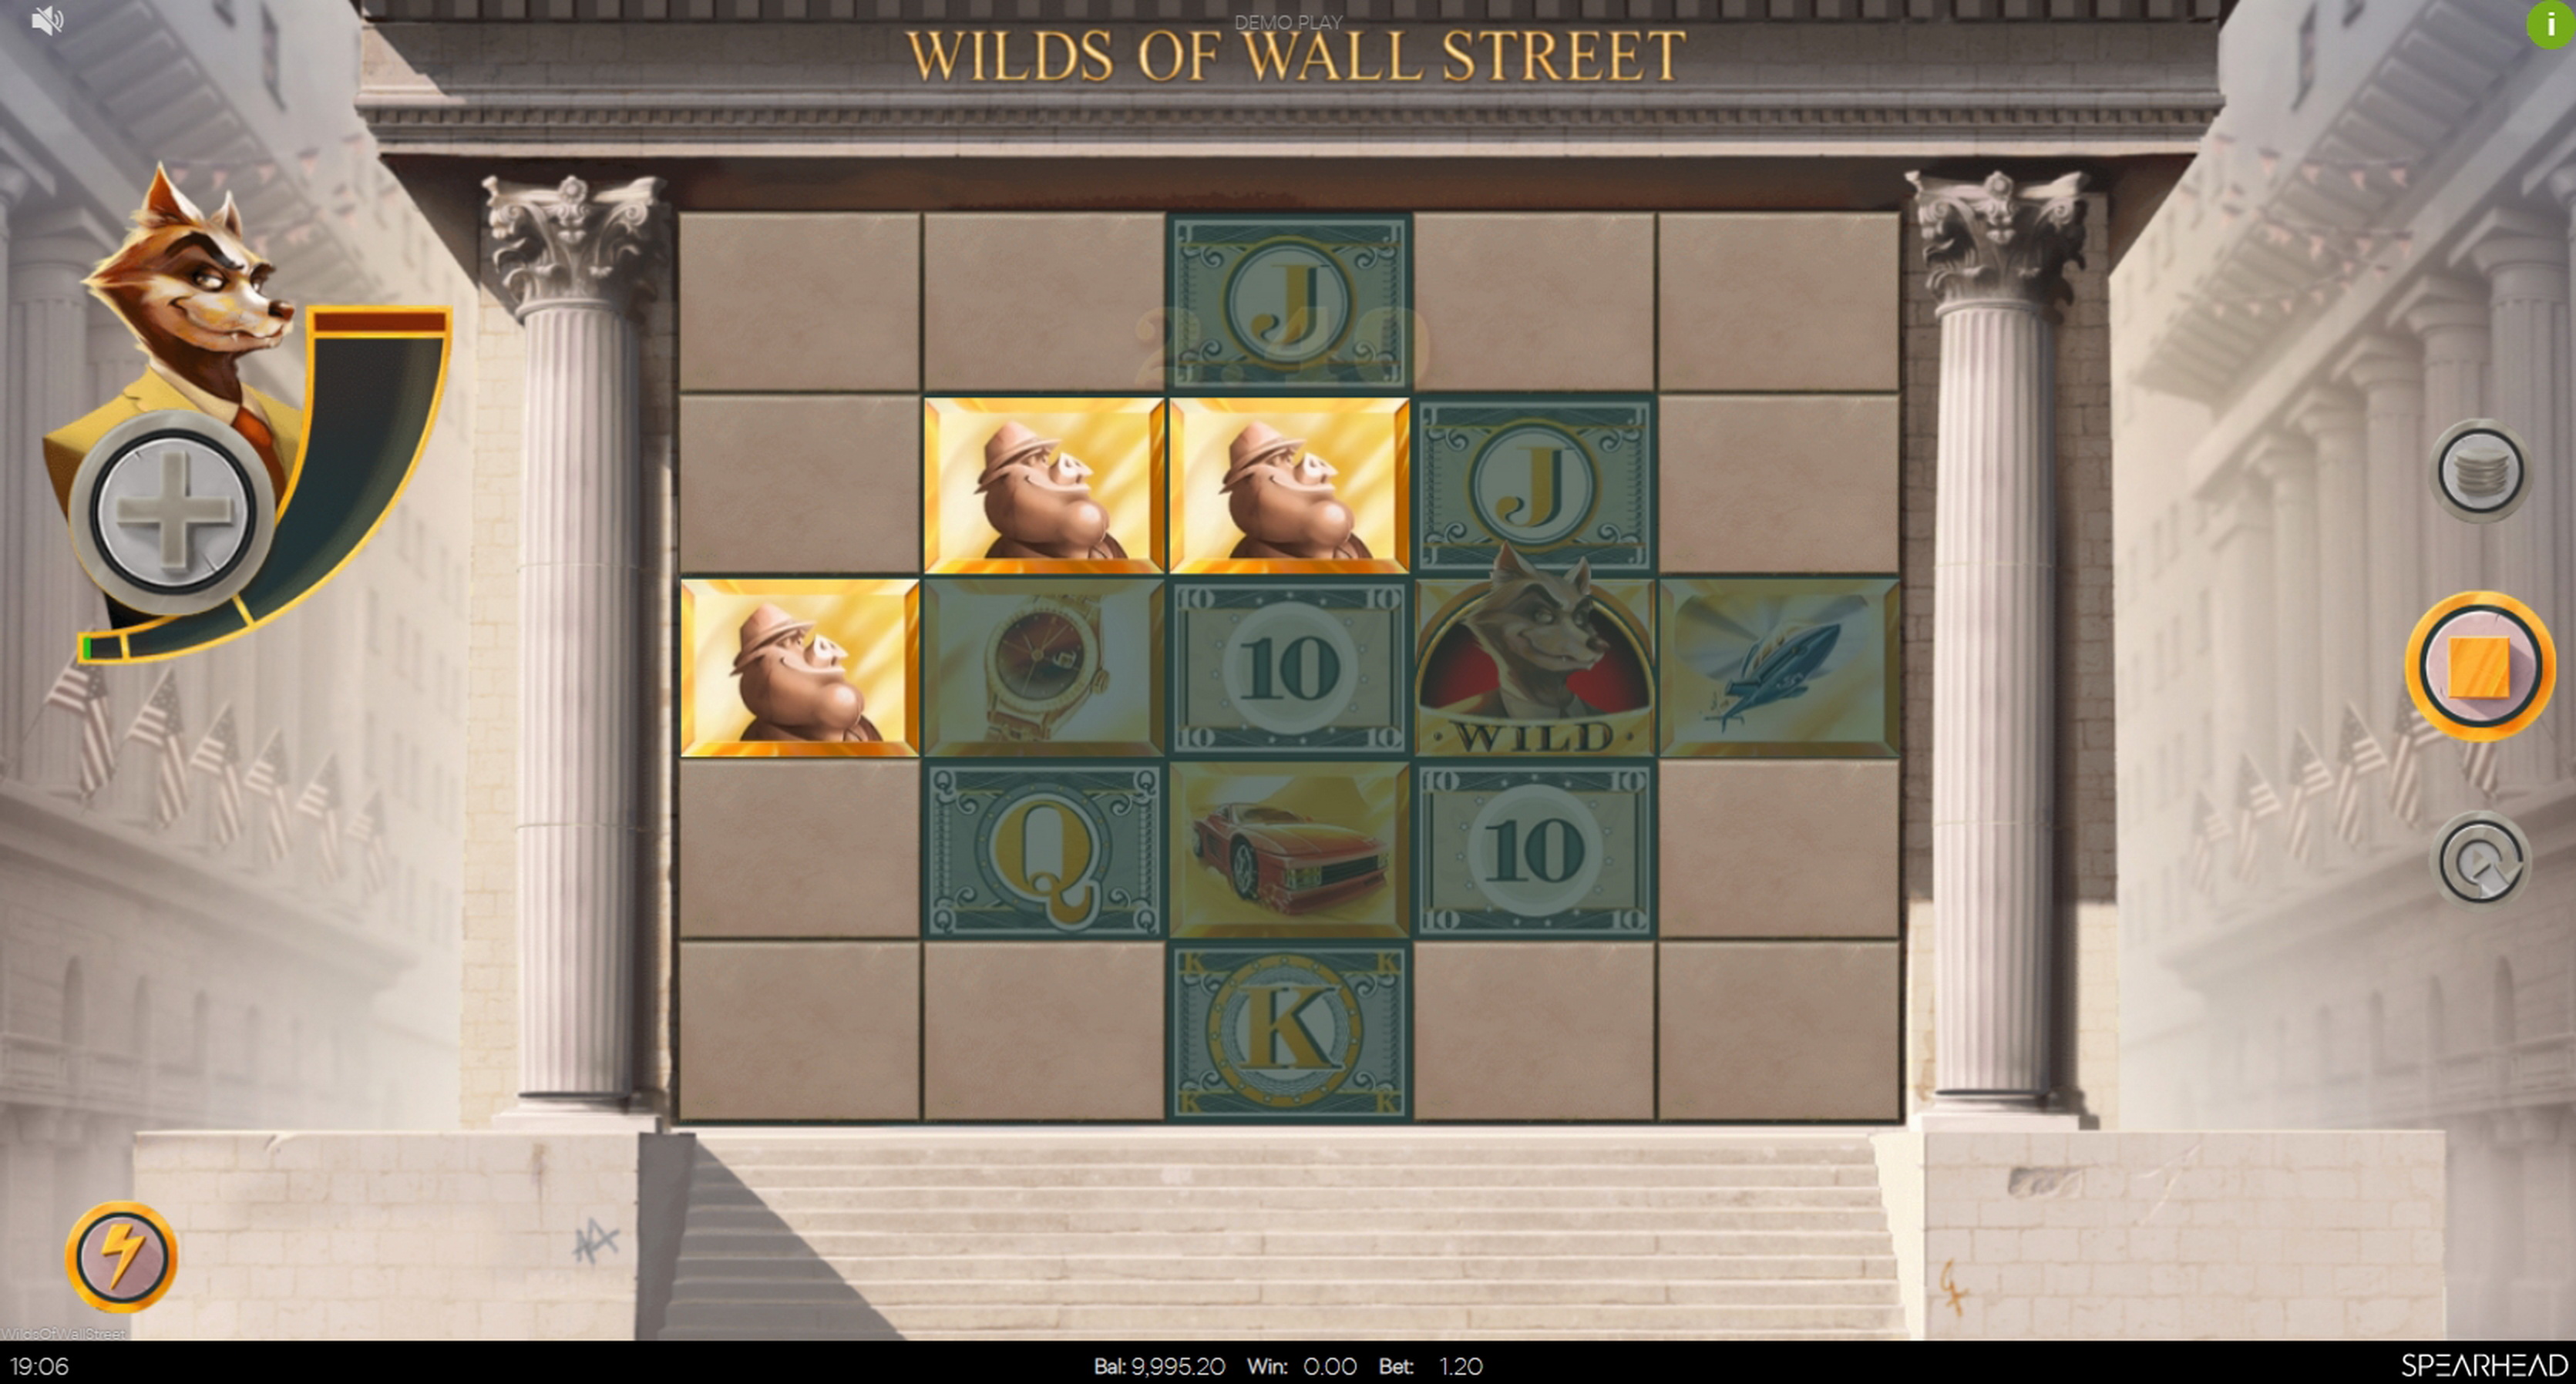 Win Money in Wilds of Wall Street Free Slot Game by Spearhead Studios